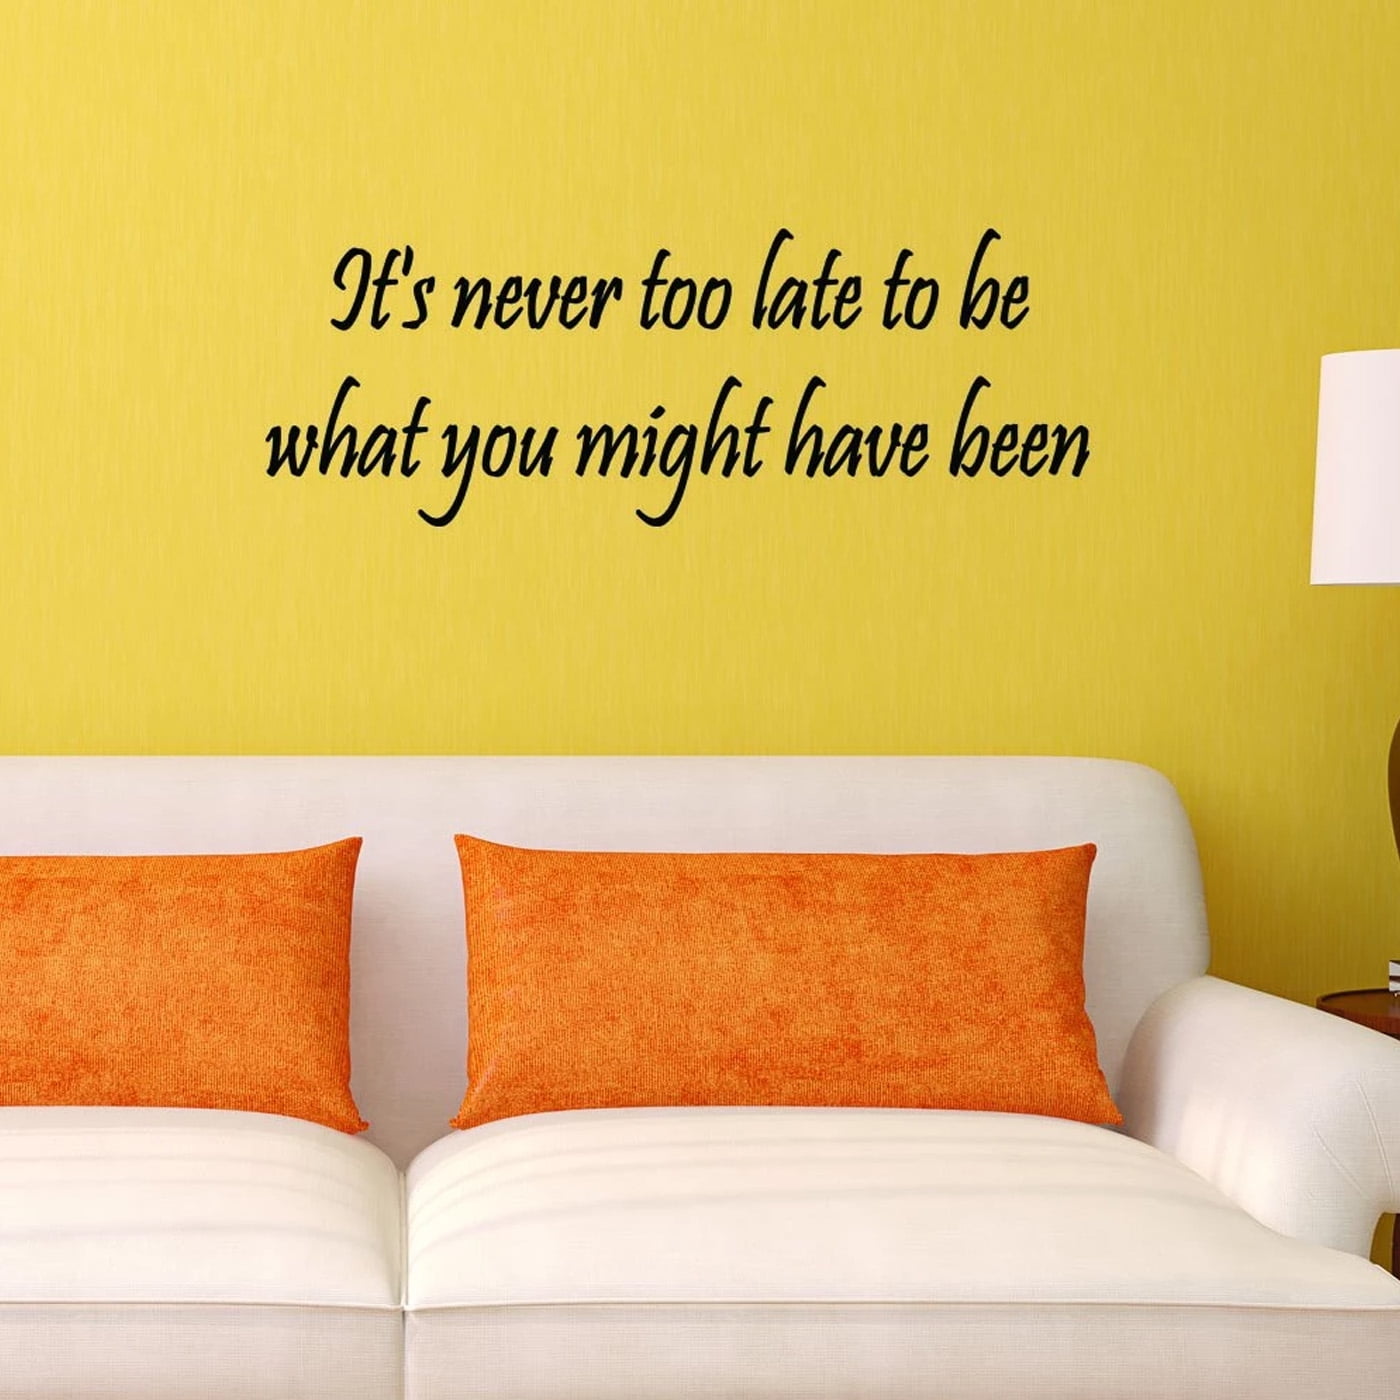 Vwaq It S Never Too Late To Be What You Might Have Been Vinyl Wall Art Motivational Quote Decal Lettering V1 Walmart Com Walmart Com